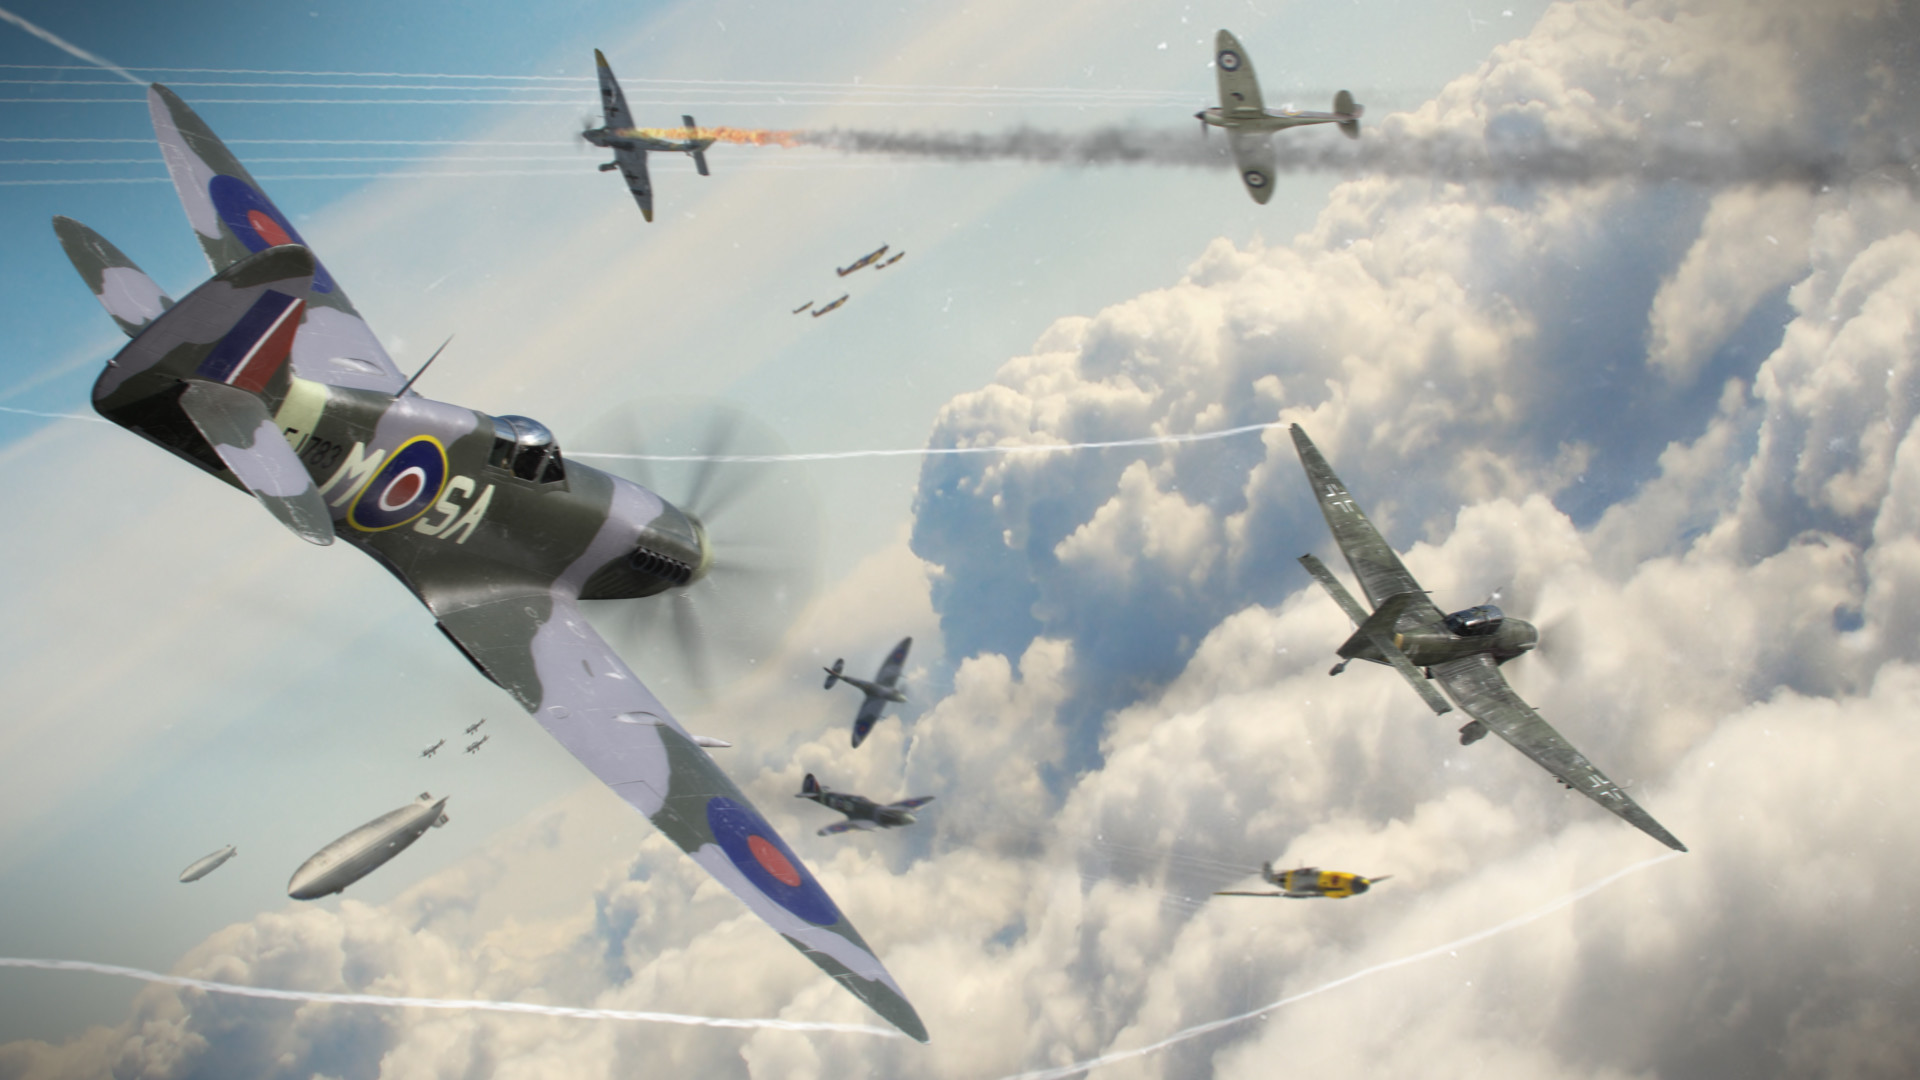 Spitfire Mk - Spitfires In A Dogfight - HD Wallpaper 